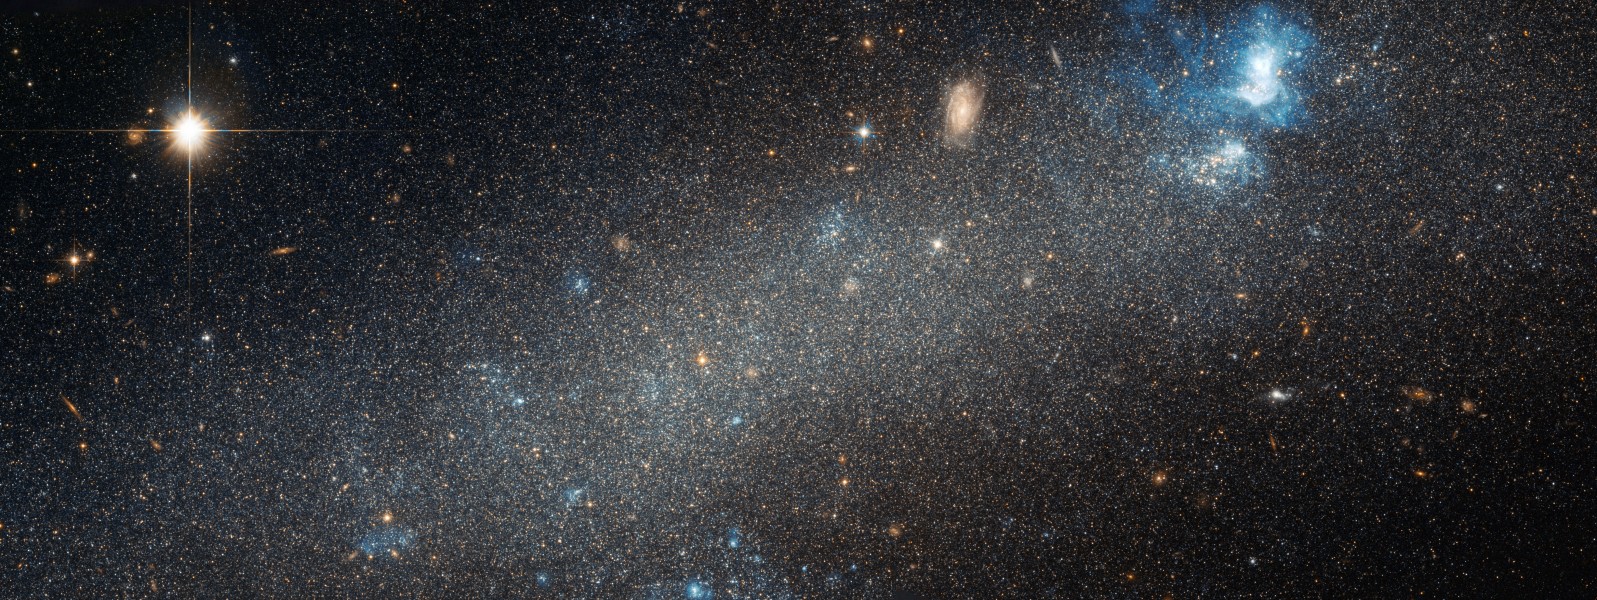 Hubble view of NGC 2366 - Heic1207a